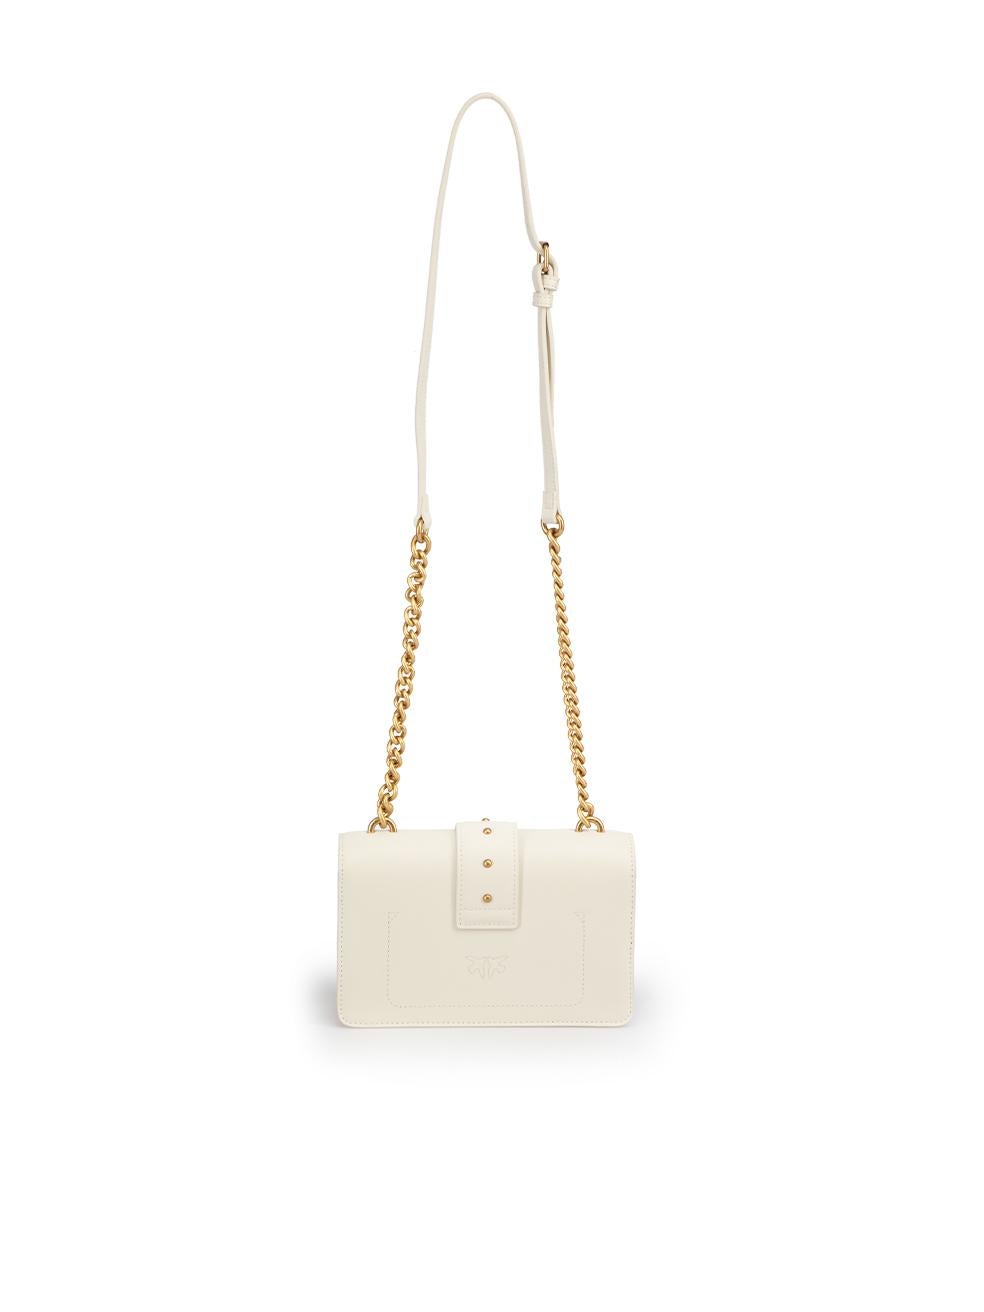 Pinko White Leather Love One Mini Crossbody Bag In New Condition For Sale In London, GB